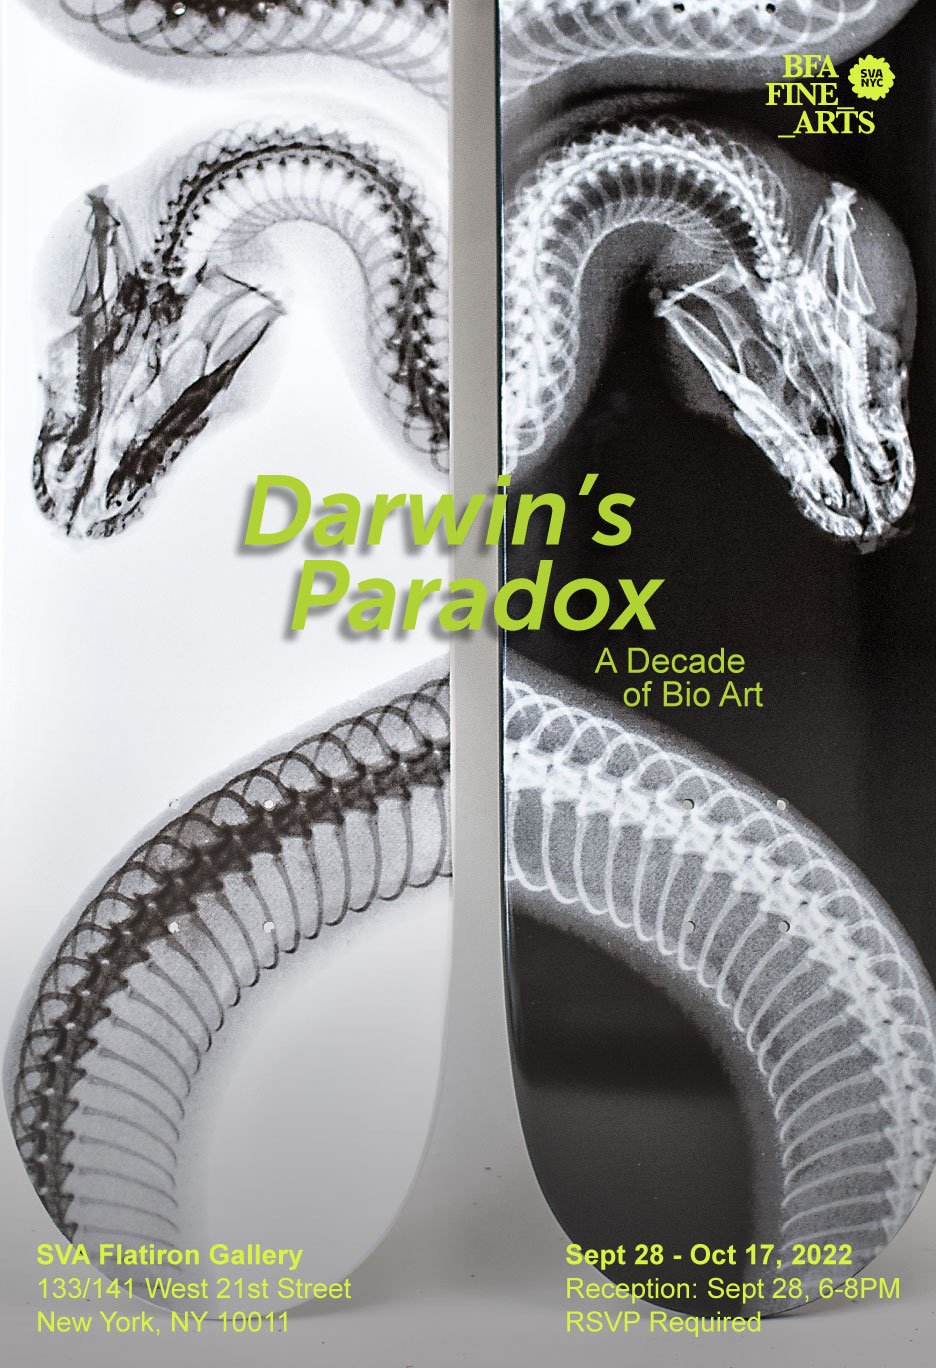 A poster for the exhibition at the SVA Flatiron Gallery, Darwin's Paradox: A Decade of Bio Art. The poster features an image of an artwork by Steve Miller. The artwork shows the back of two skateboards with x-ray scans of snakes.